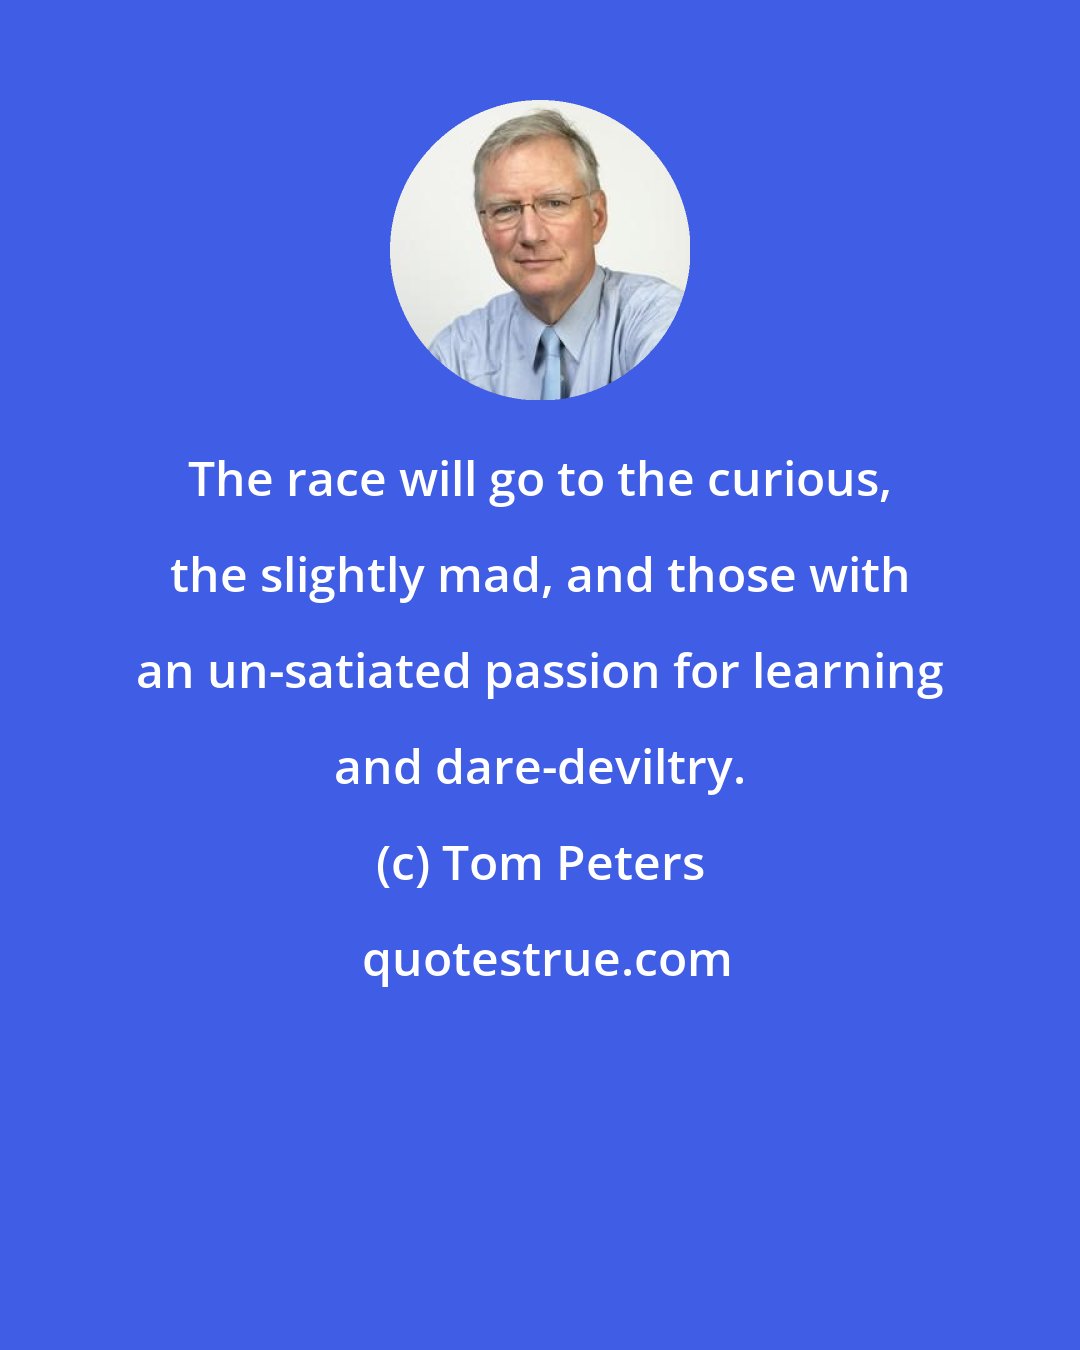 Tom Peters: The race will go to the curious, the slightly mad, and those with an un-satiated passion for learning and dare-deviltry.